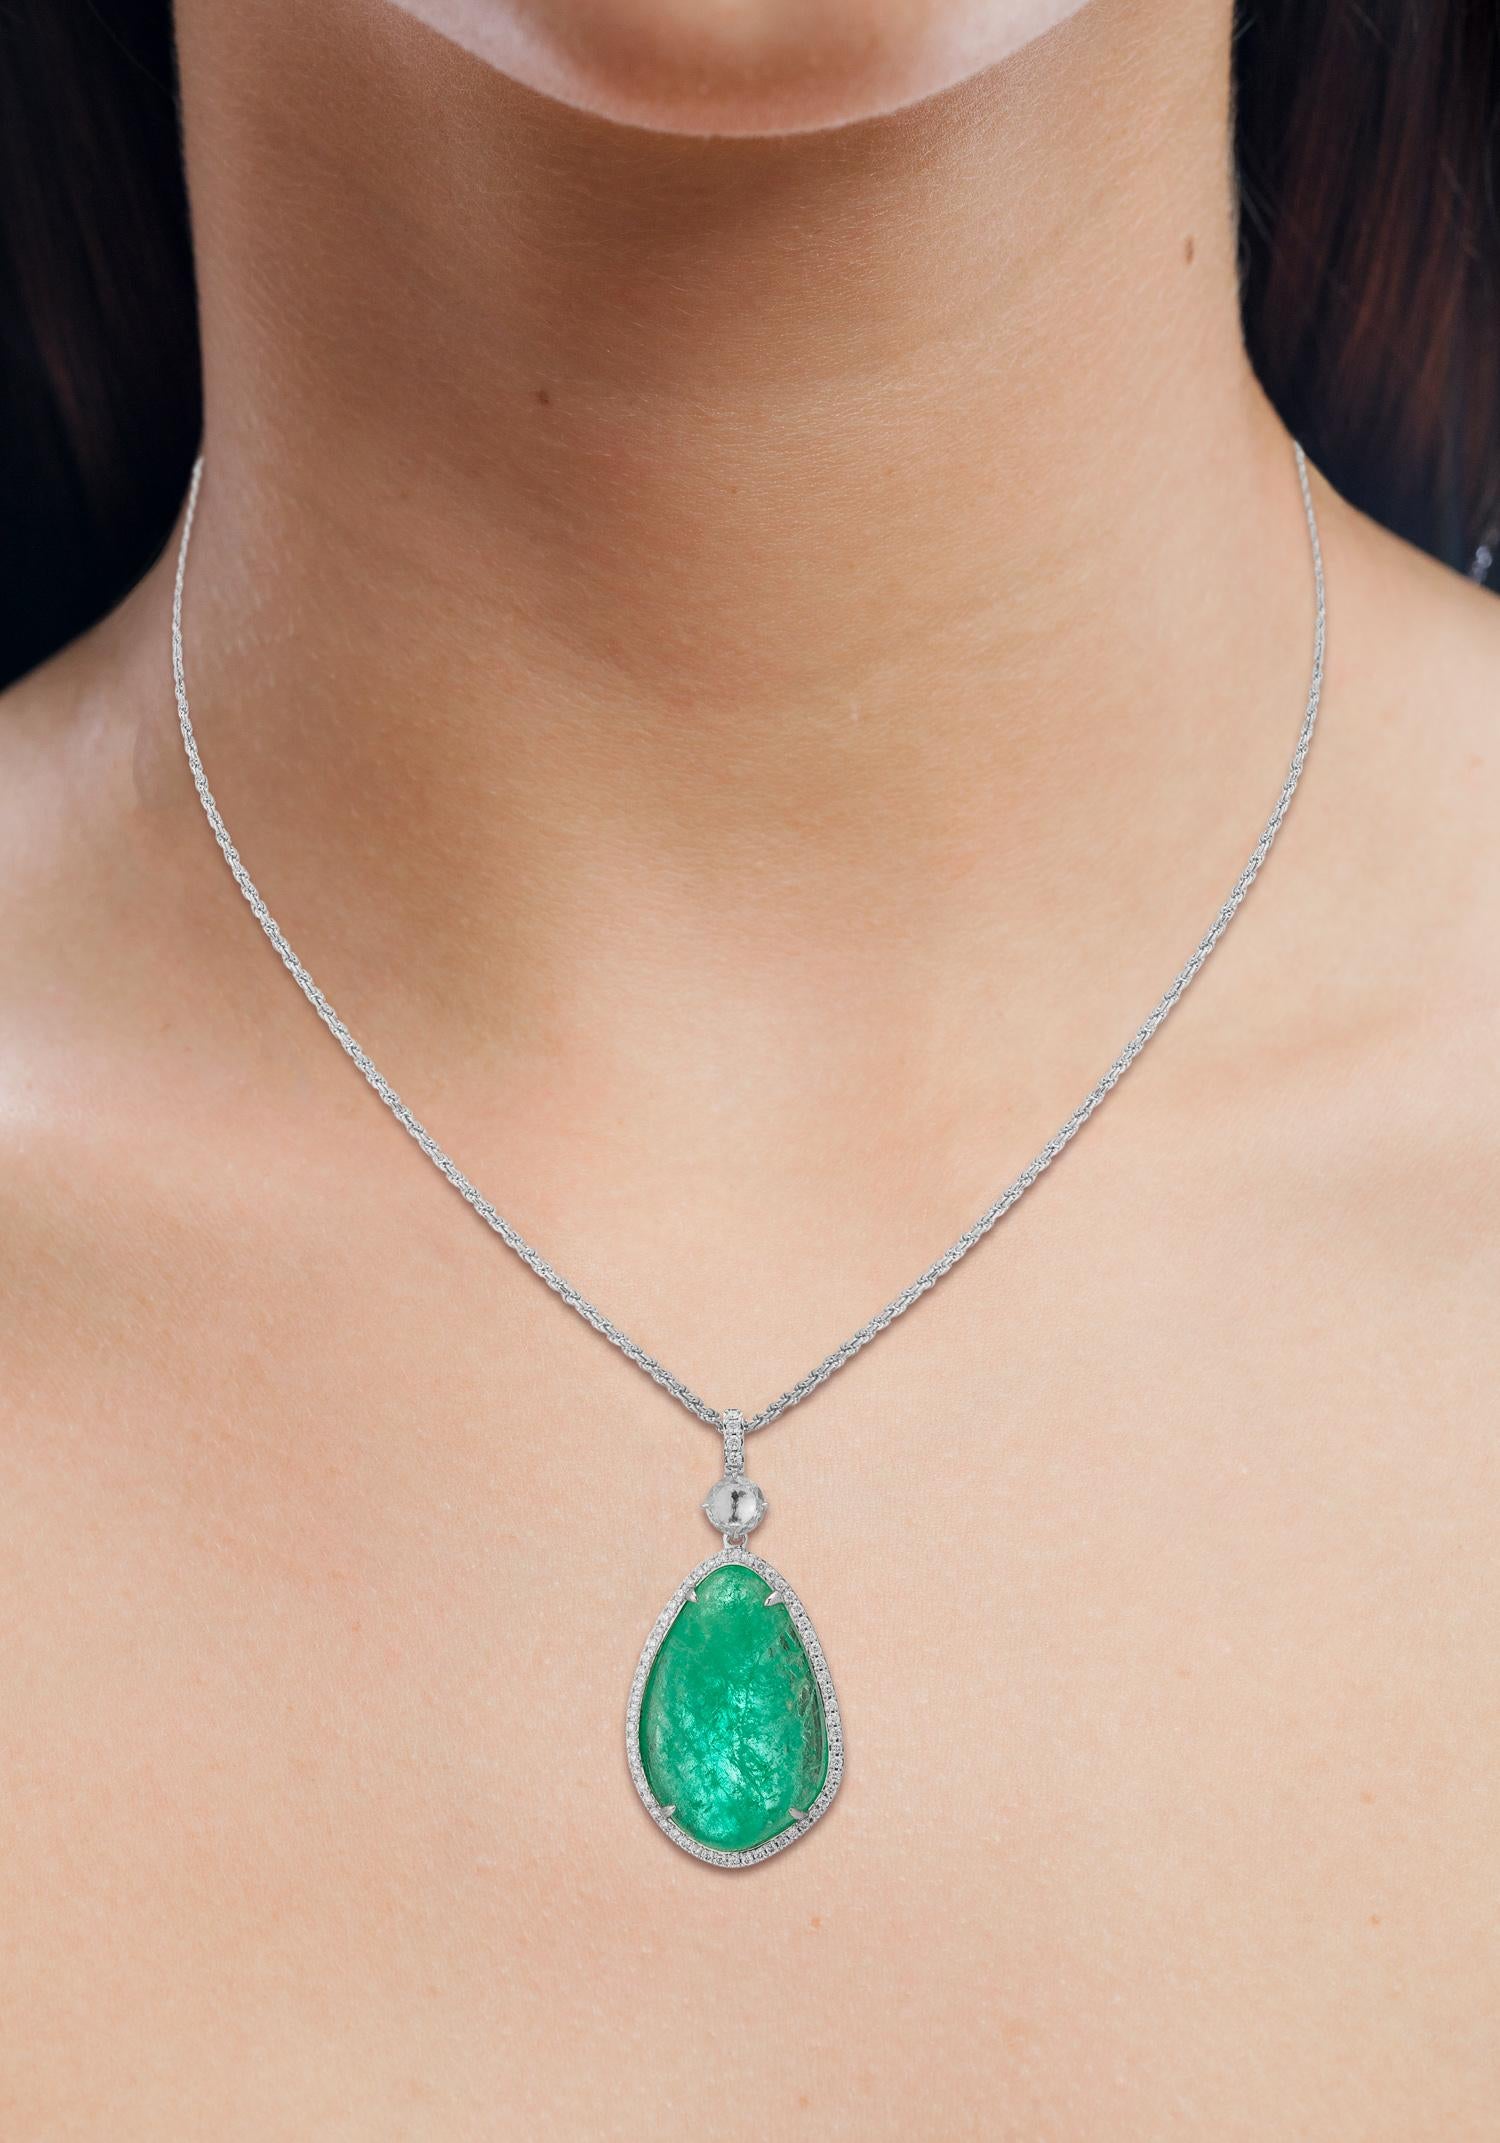 Muzo Emerald Colombia Heritage Atocha Necklace set with 22 carats Emerald

Atocha is inspired by a collection of jeweled treasures destined for the Royal family, who ruled the Spanish Empire in the 17th century.  The galleons of the Nuestra Señora